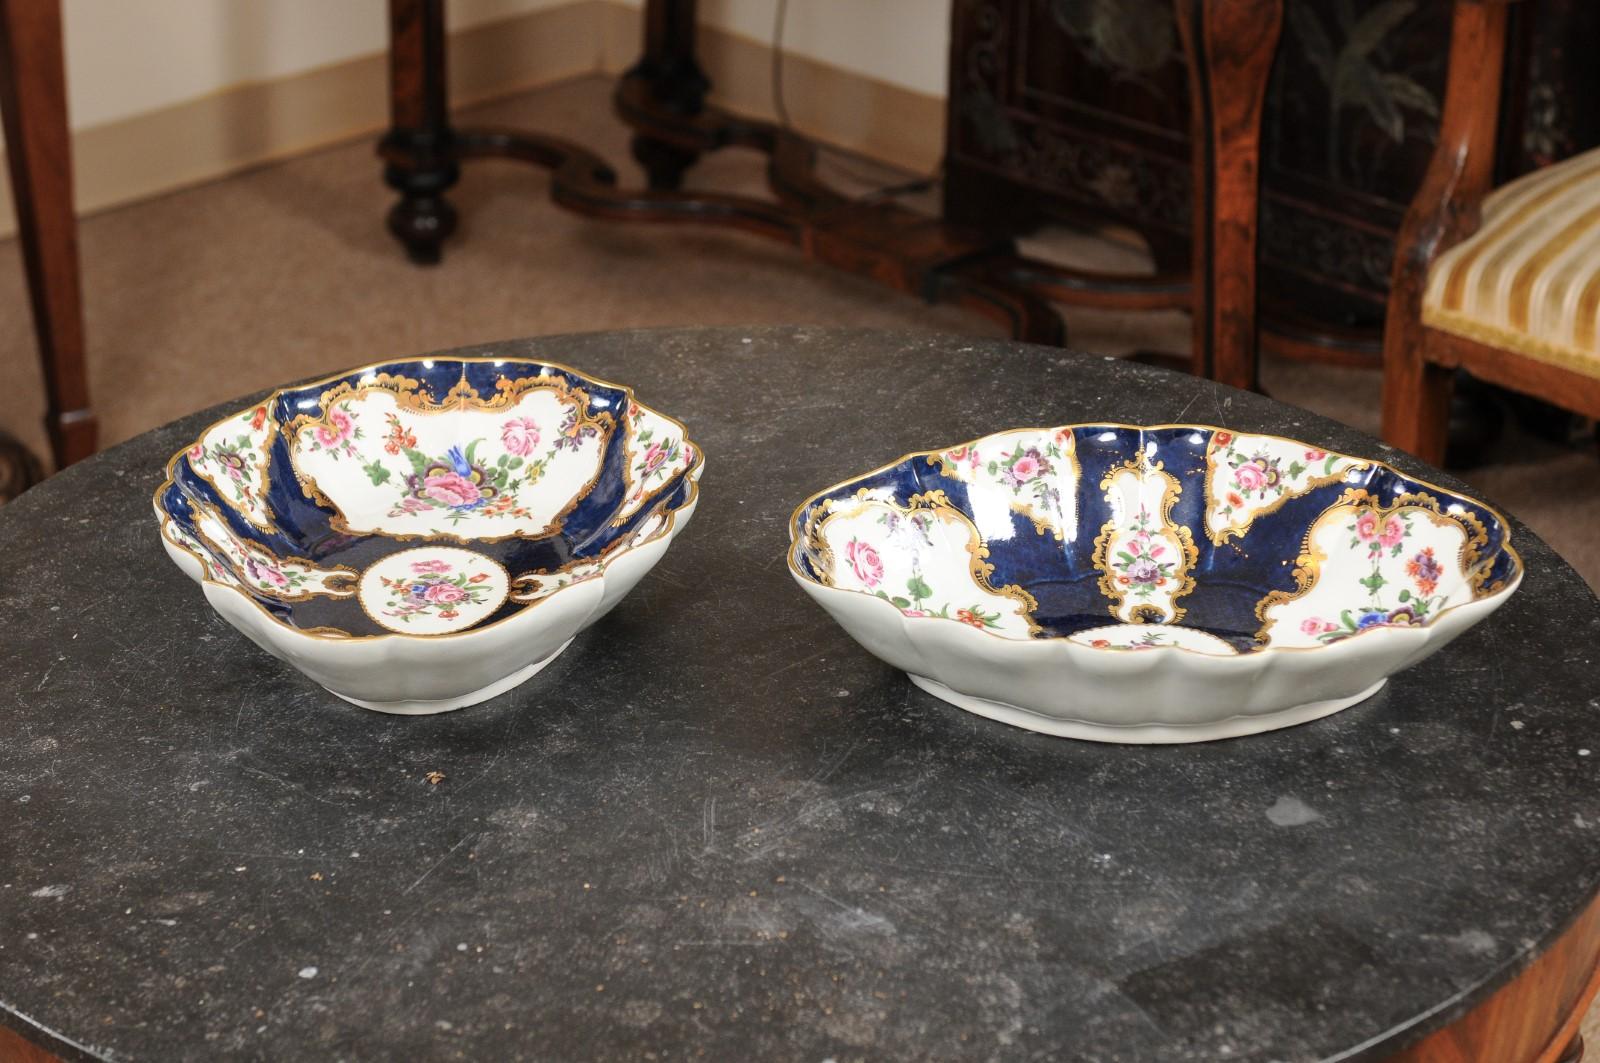 Pair of 18th Century English Worcester Porcelain Serving Dishes, “Dr. Wall” For Sale 4